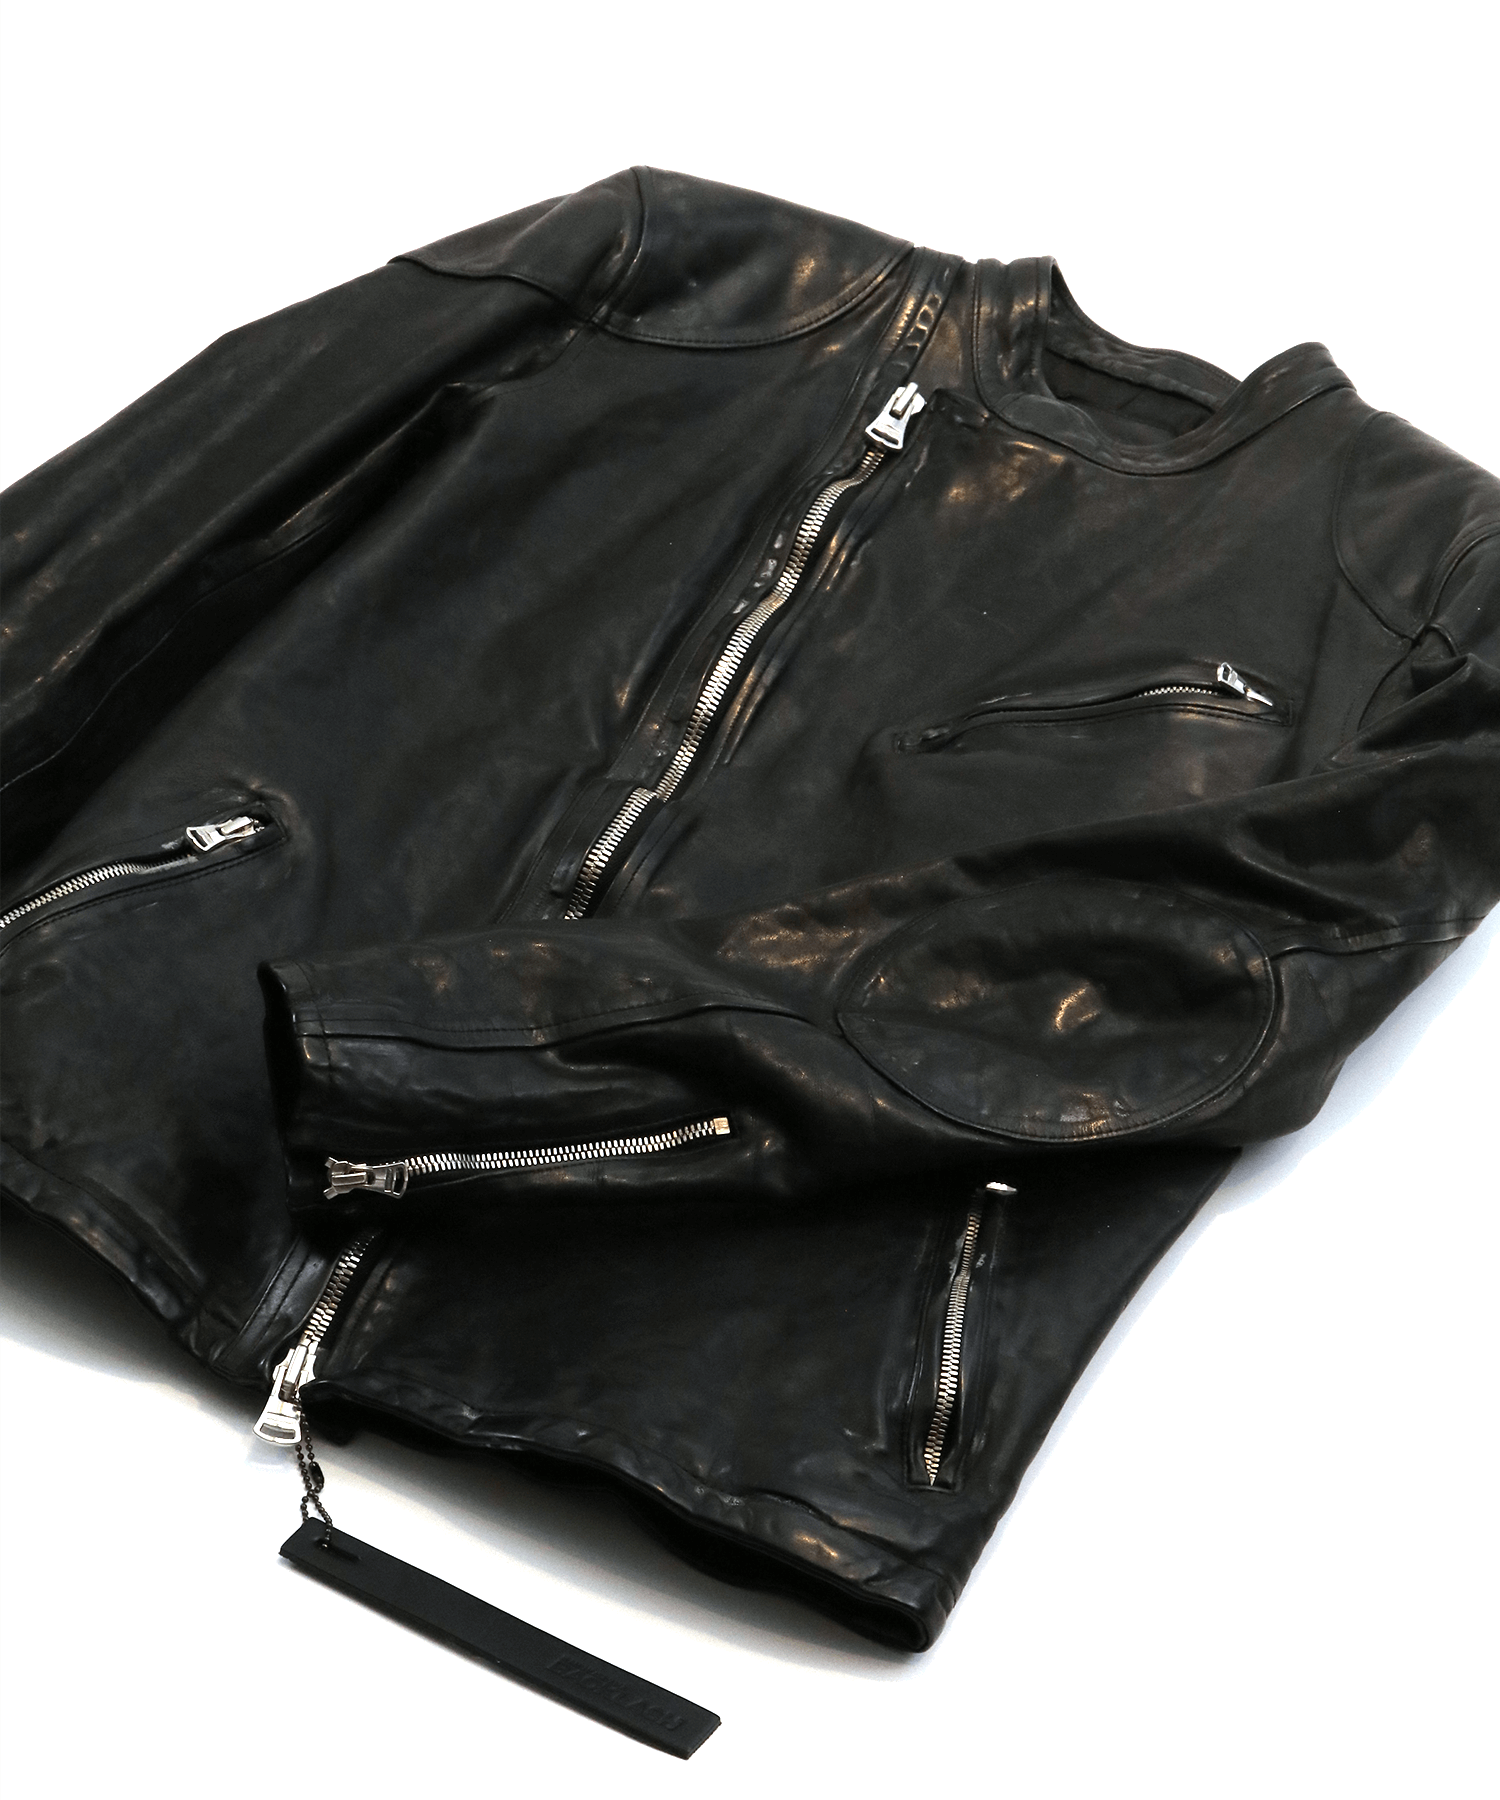 BACKLASH FRENCH SHOULDER “GARMENT-DYED” SEMI-DOUBLE RIDERS